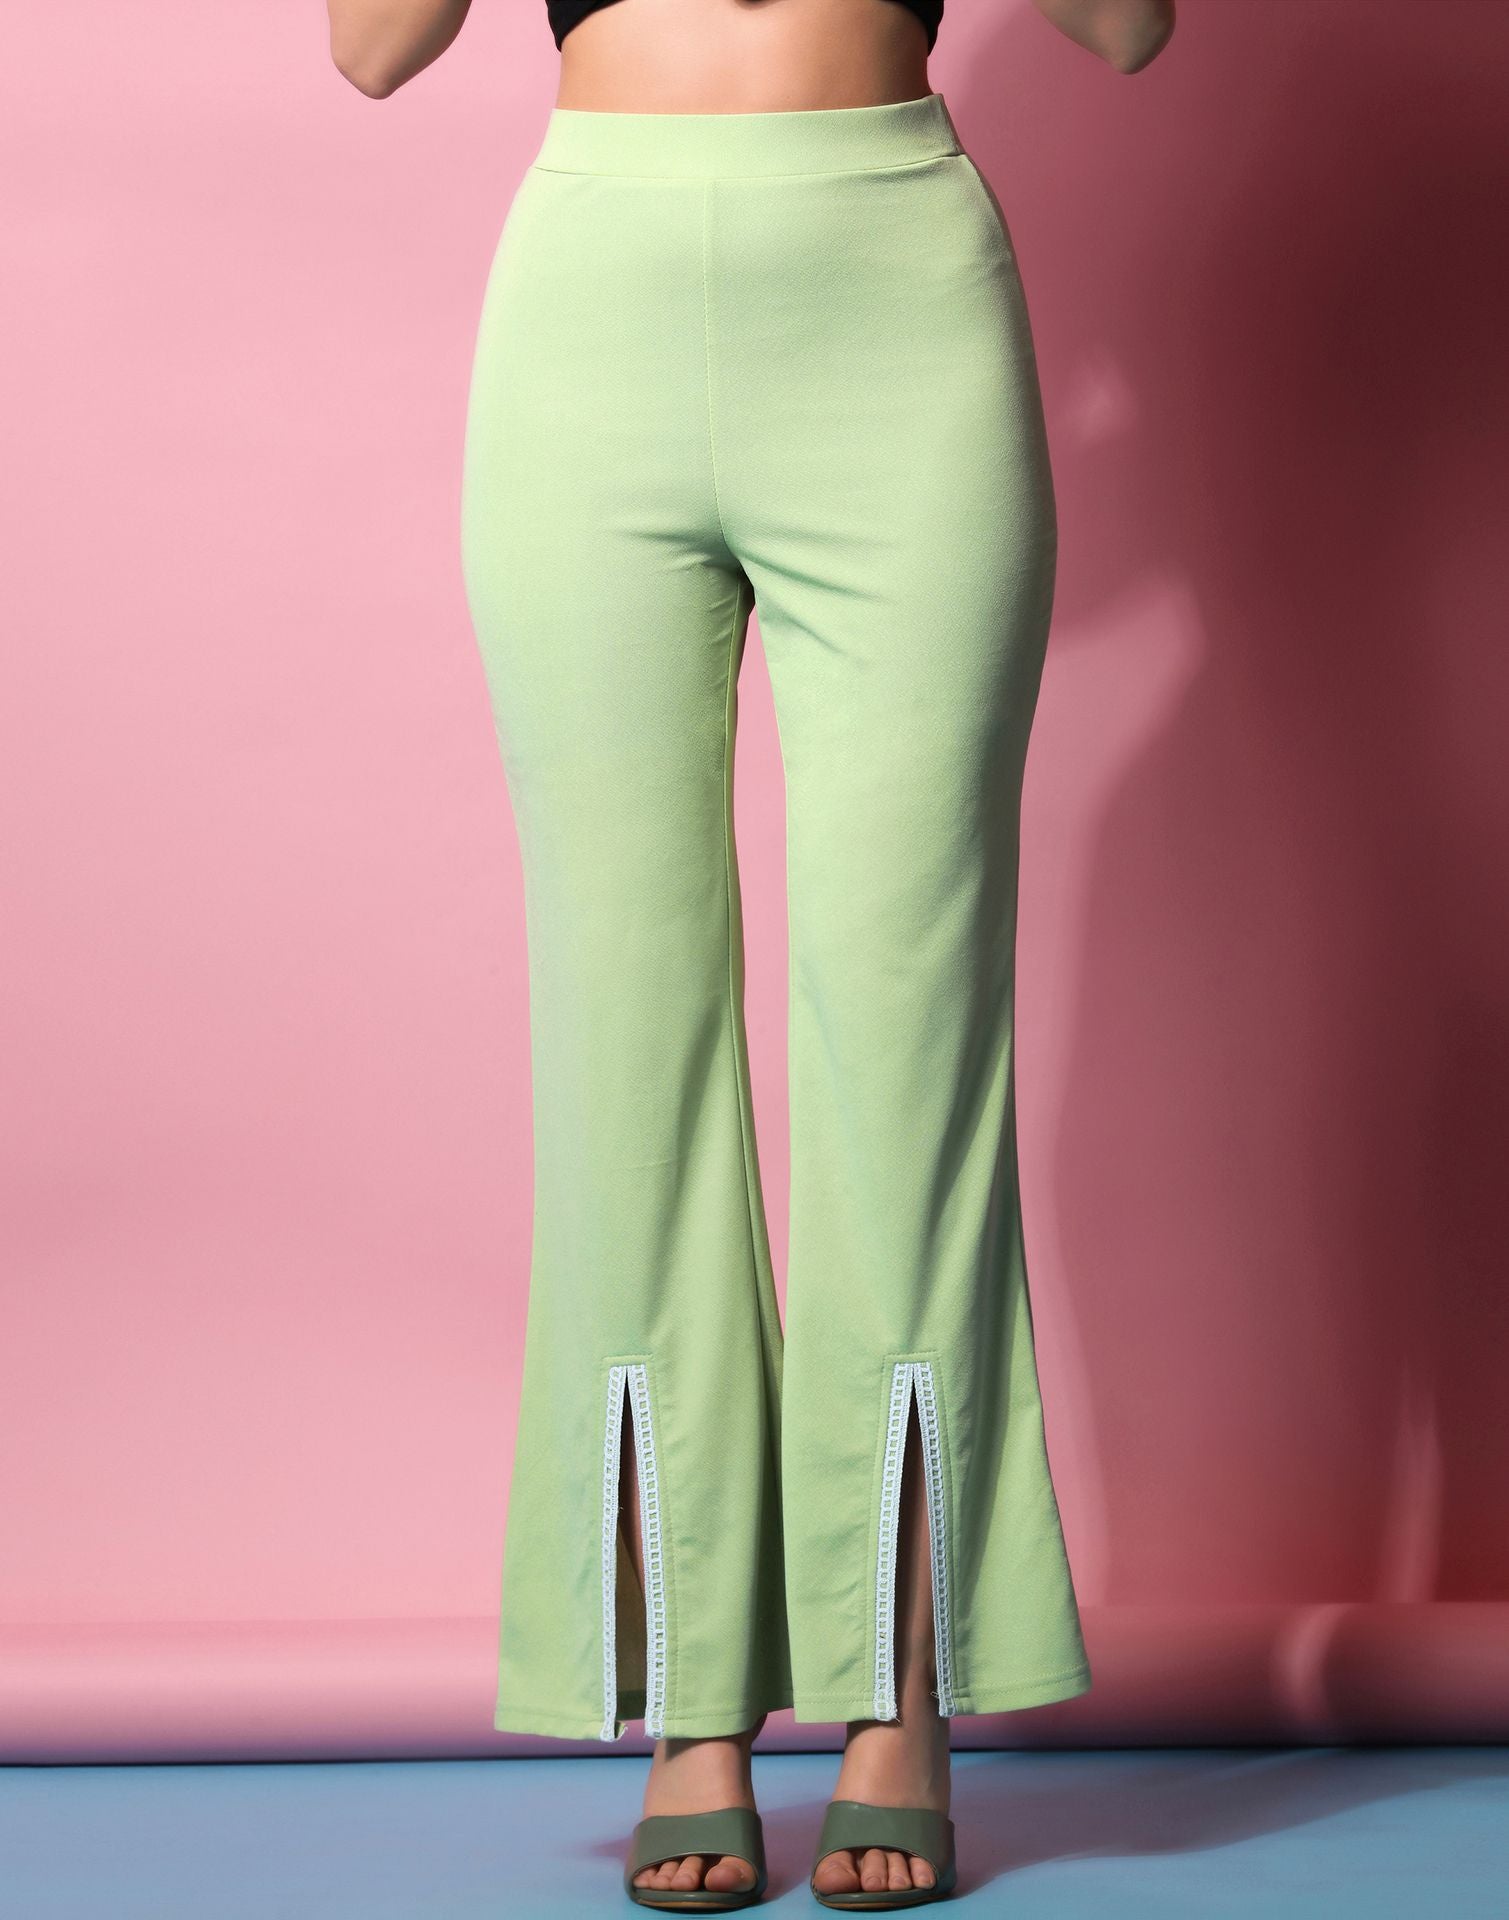 Green Flare Pants with Green Pants Outfits (1 ideas & outfits) | Lookastic